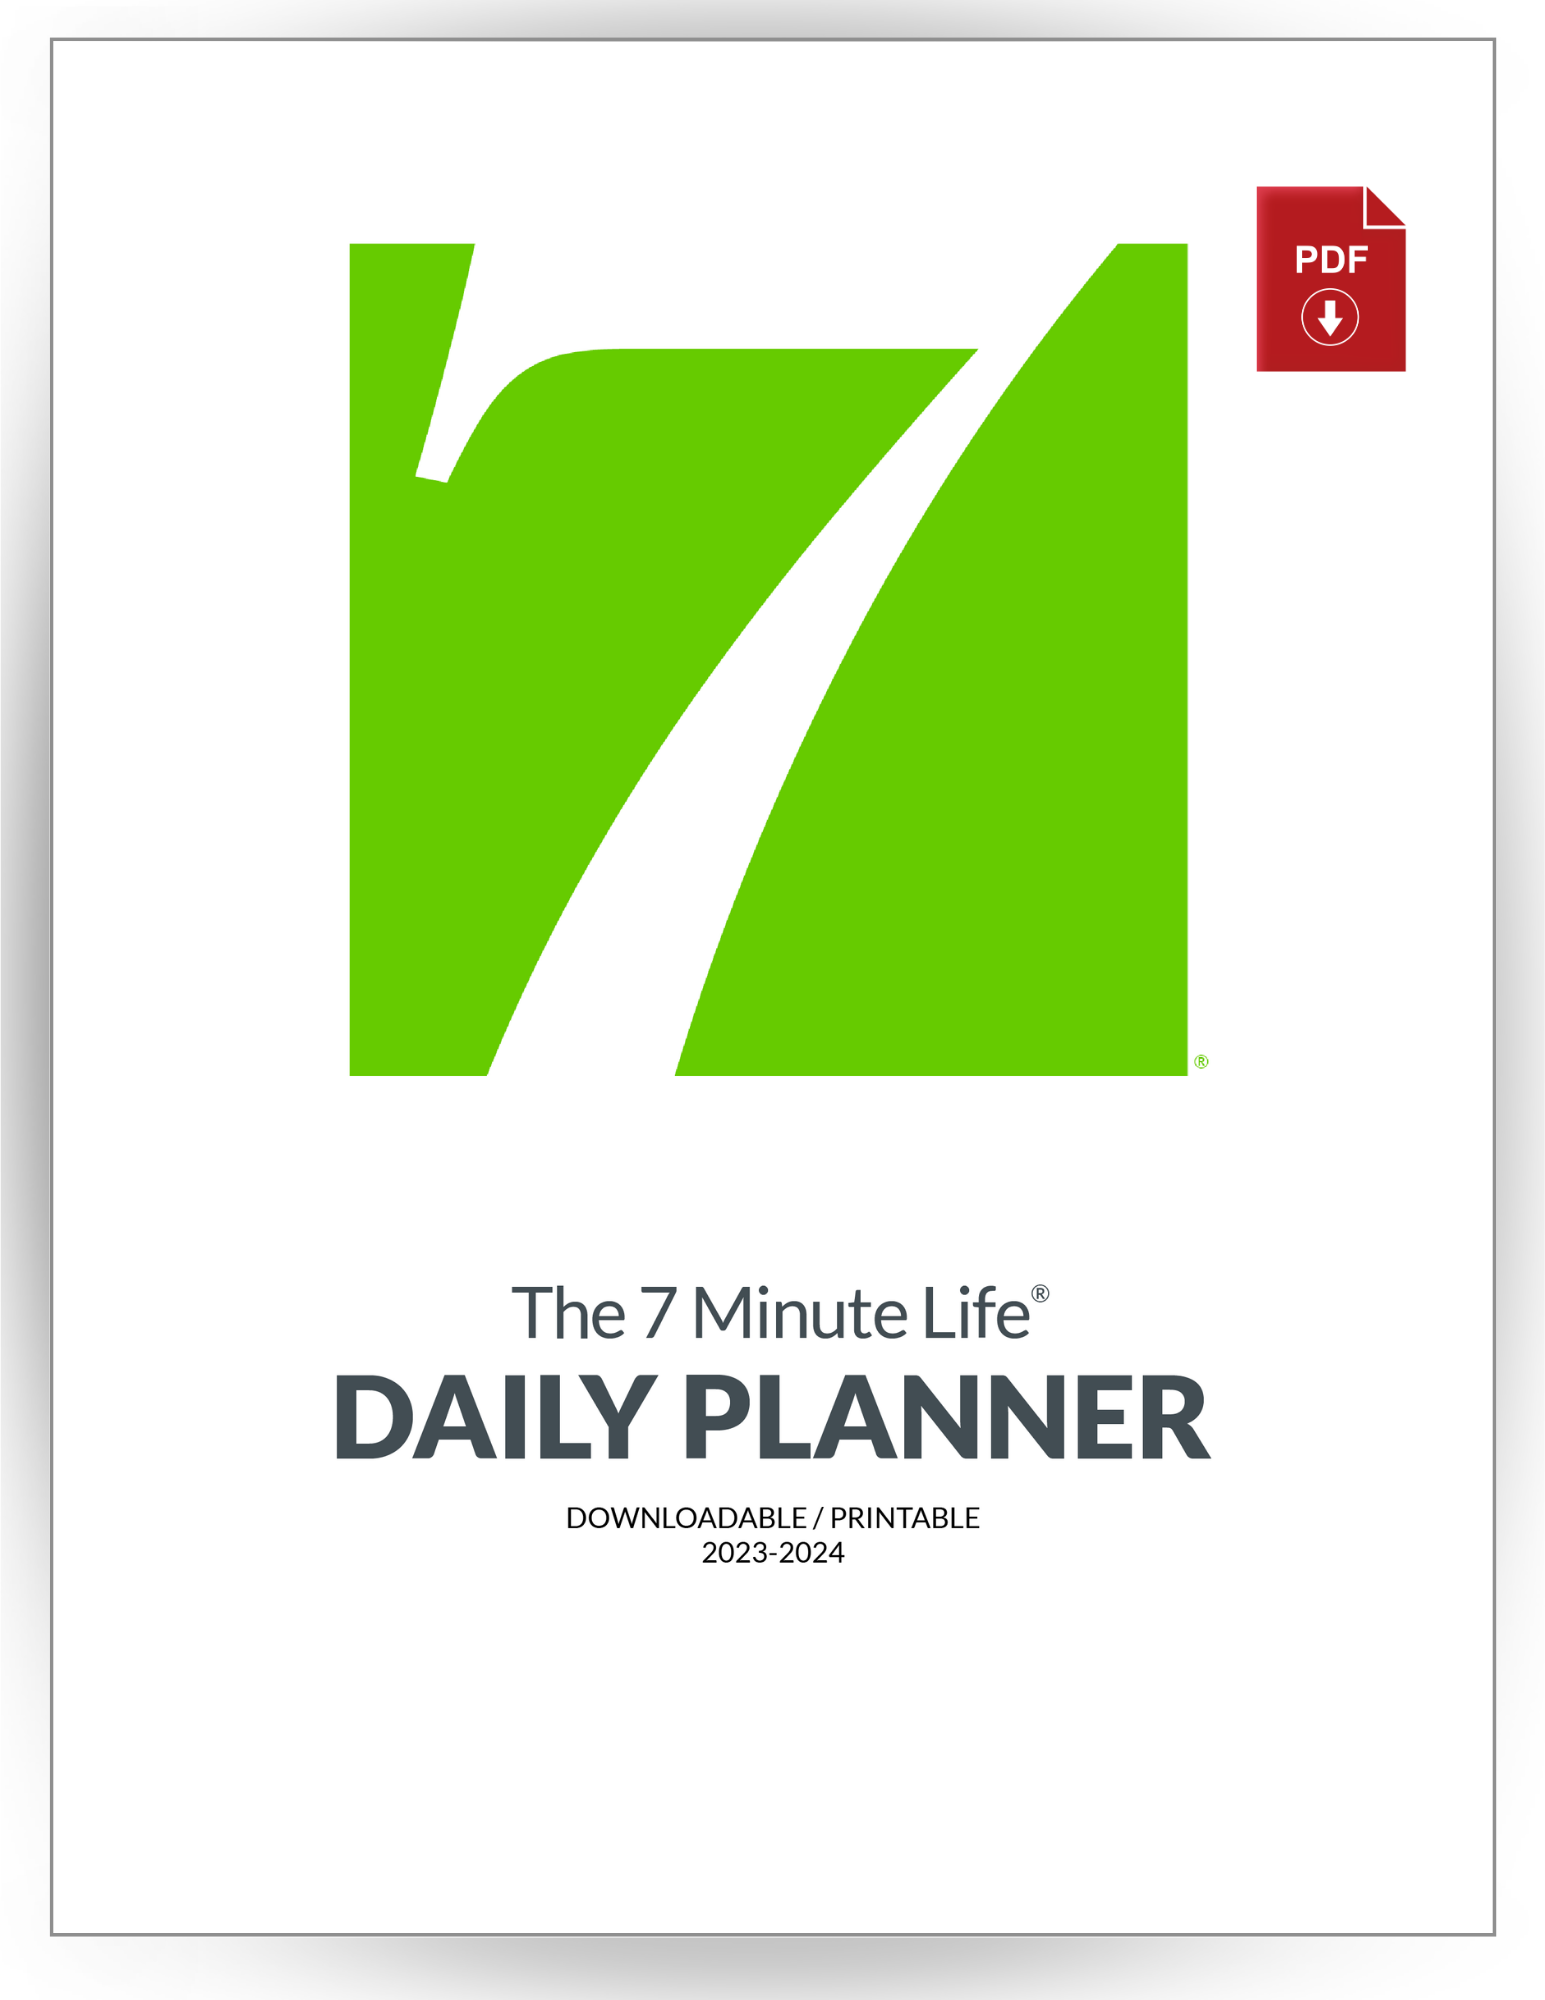 Downloadable Daily Planner Cover Image for Shop 04.23.23